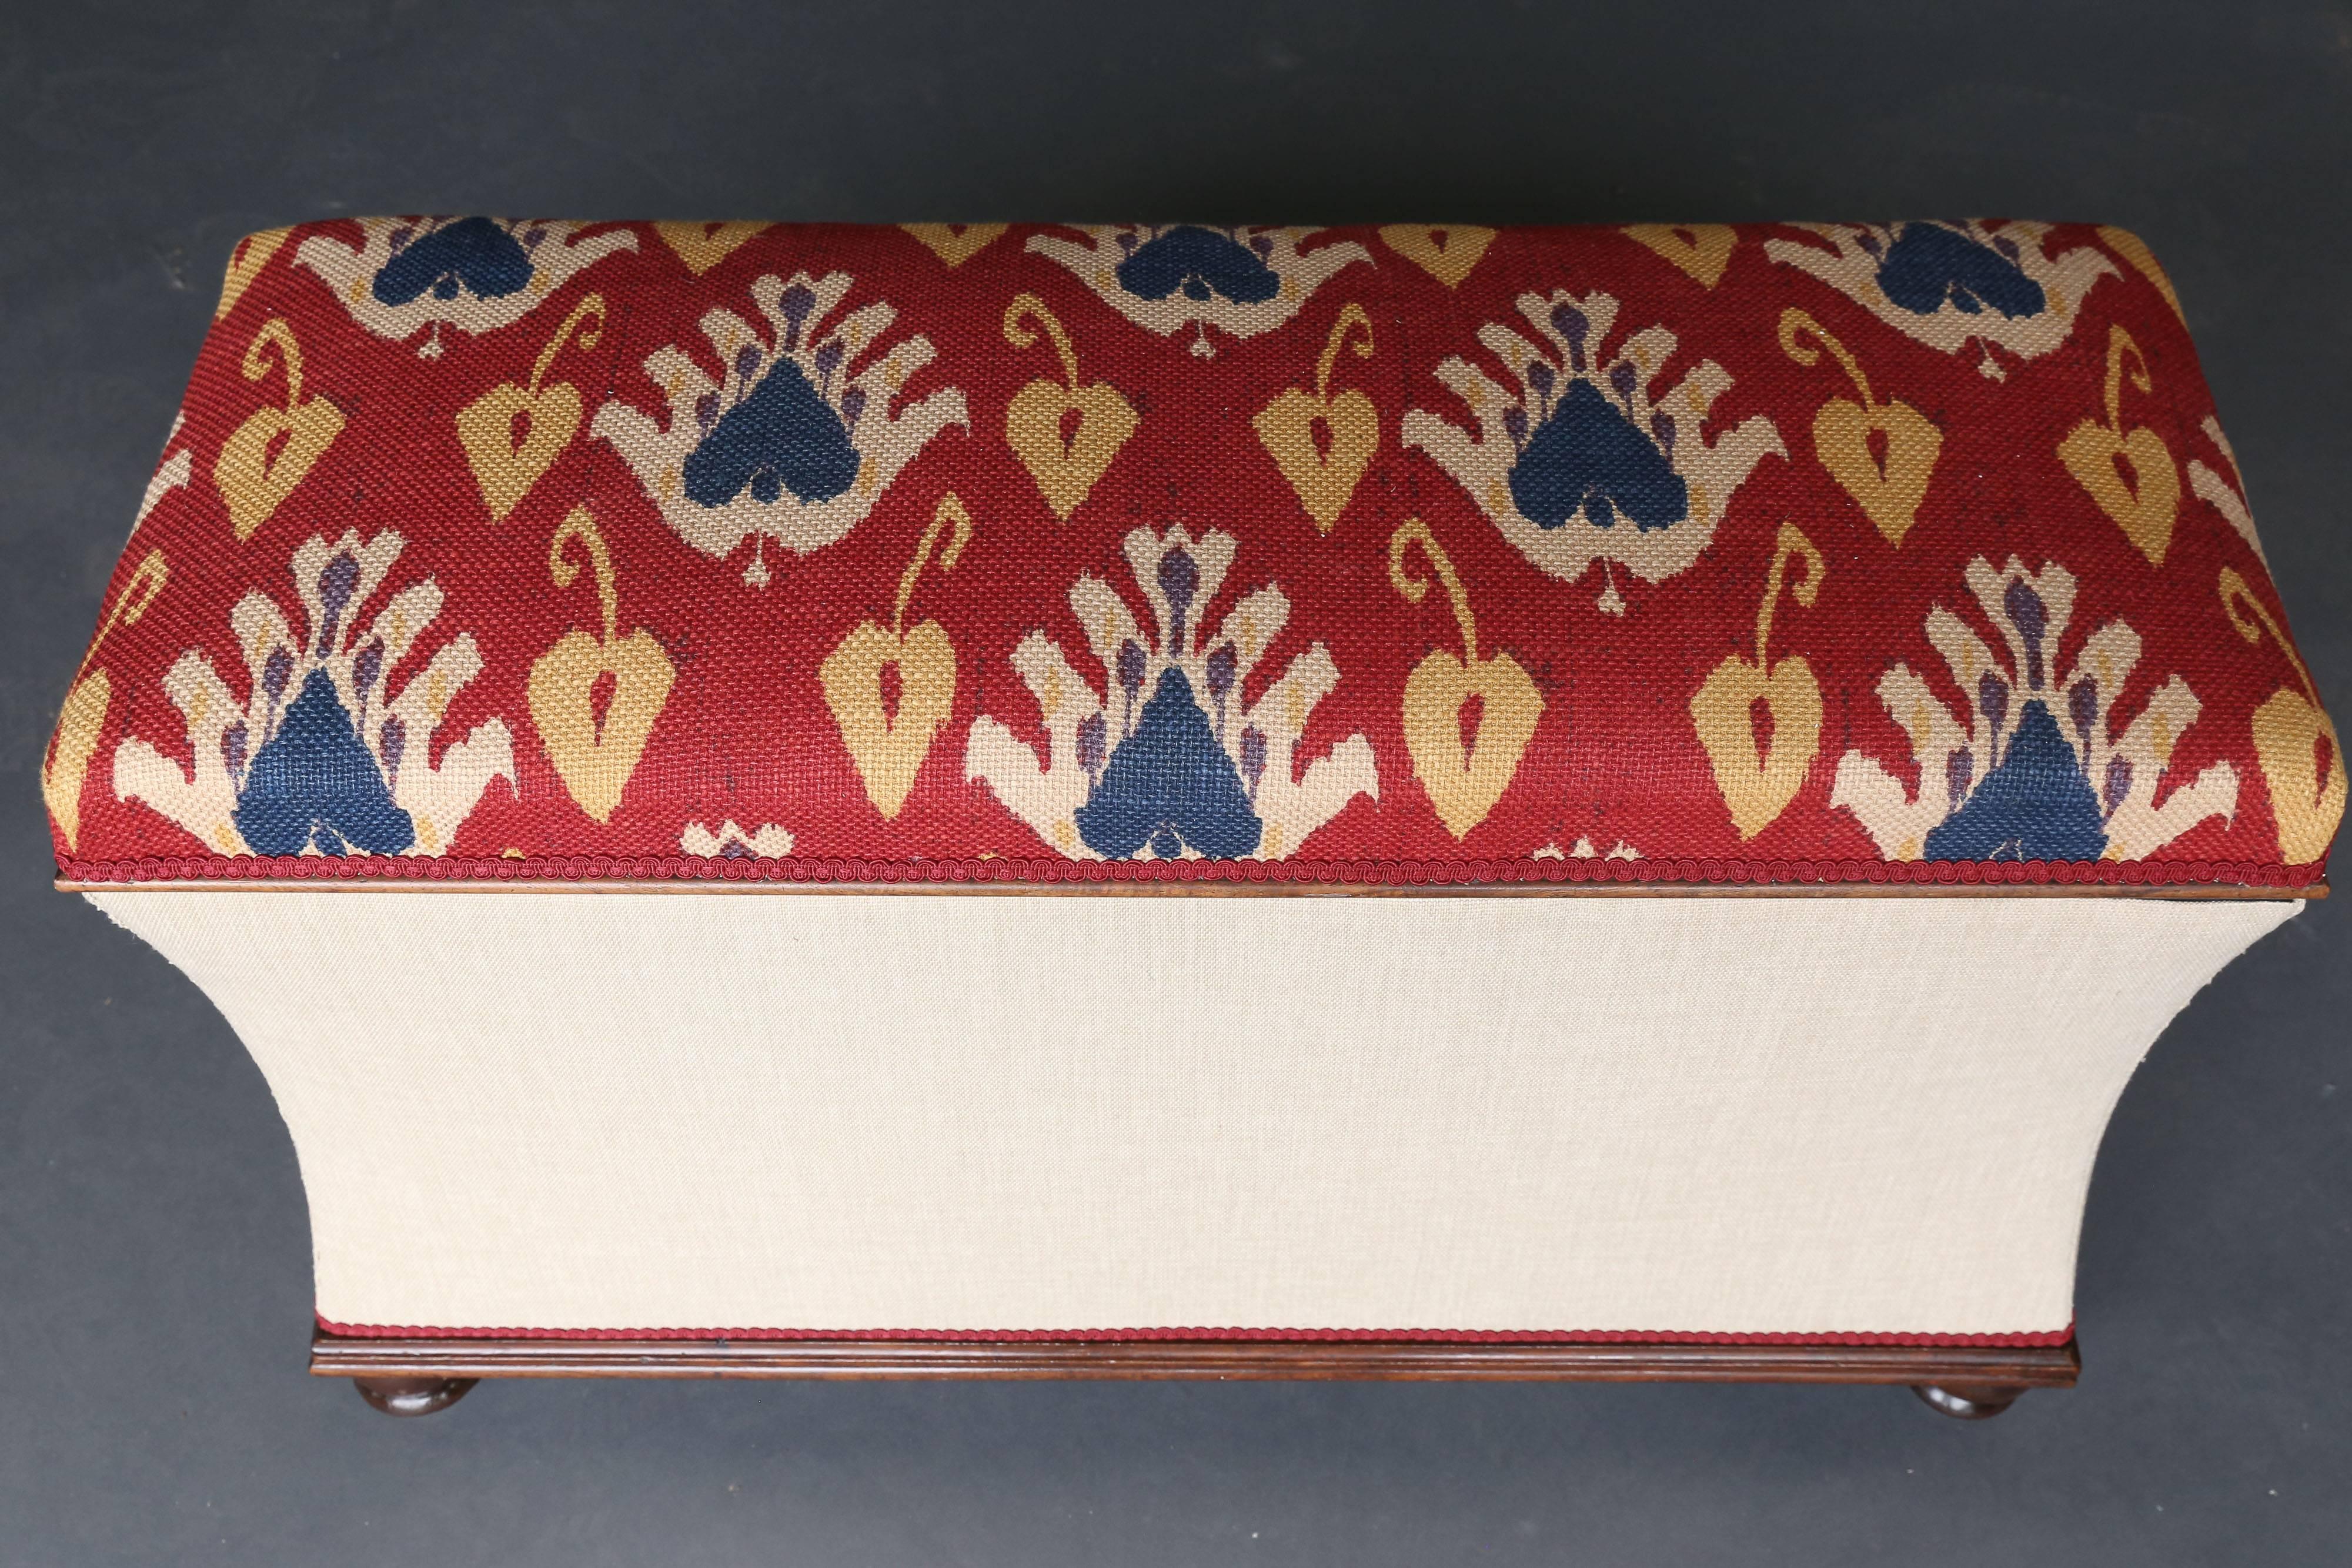 A box ottoman with mahogany bun feet. Newly upholstered but would look so much better in a single color. Great storage area within.